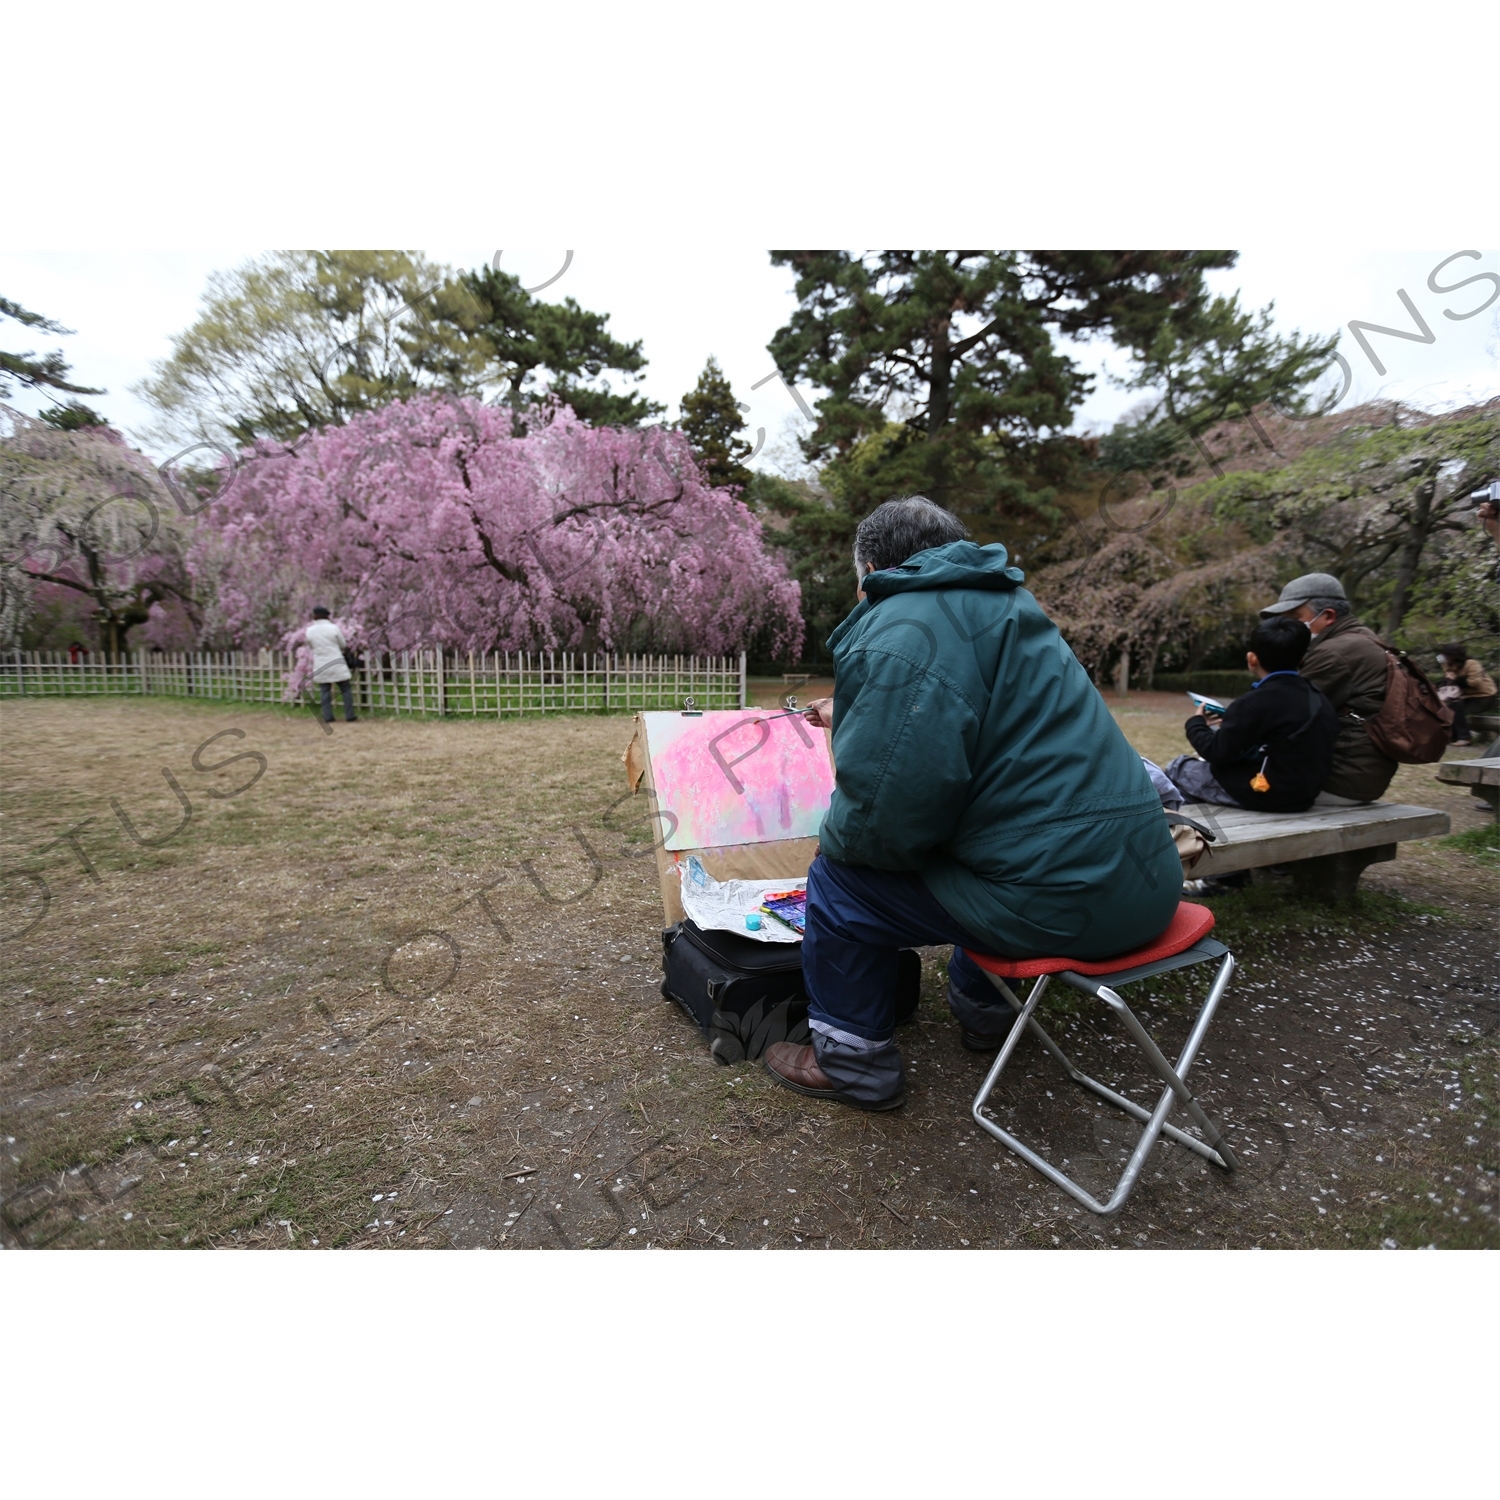 Artist Painting Cherry Blossom Trees in Kyoto Gyoen/Imperial Palace Park in Kyoto